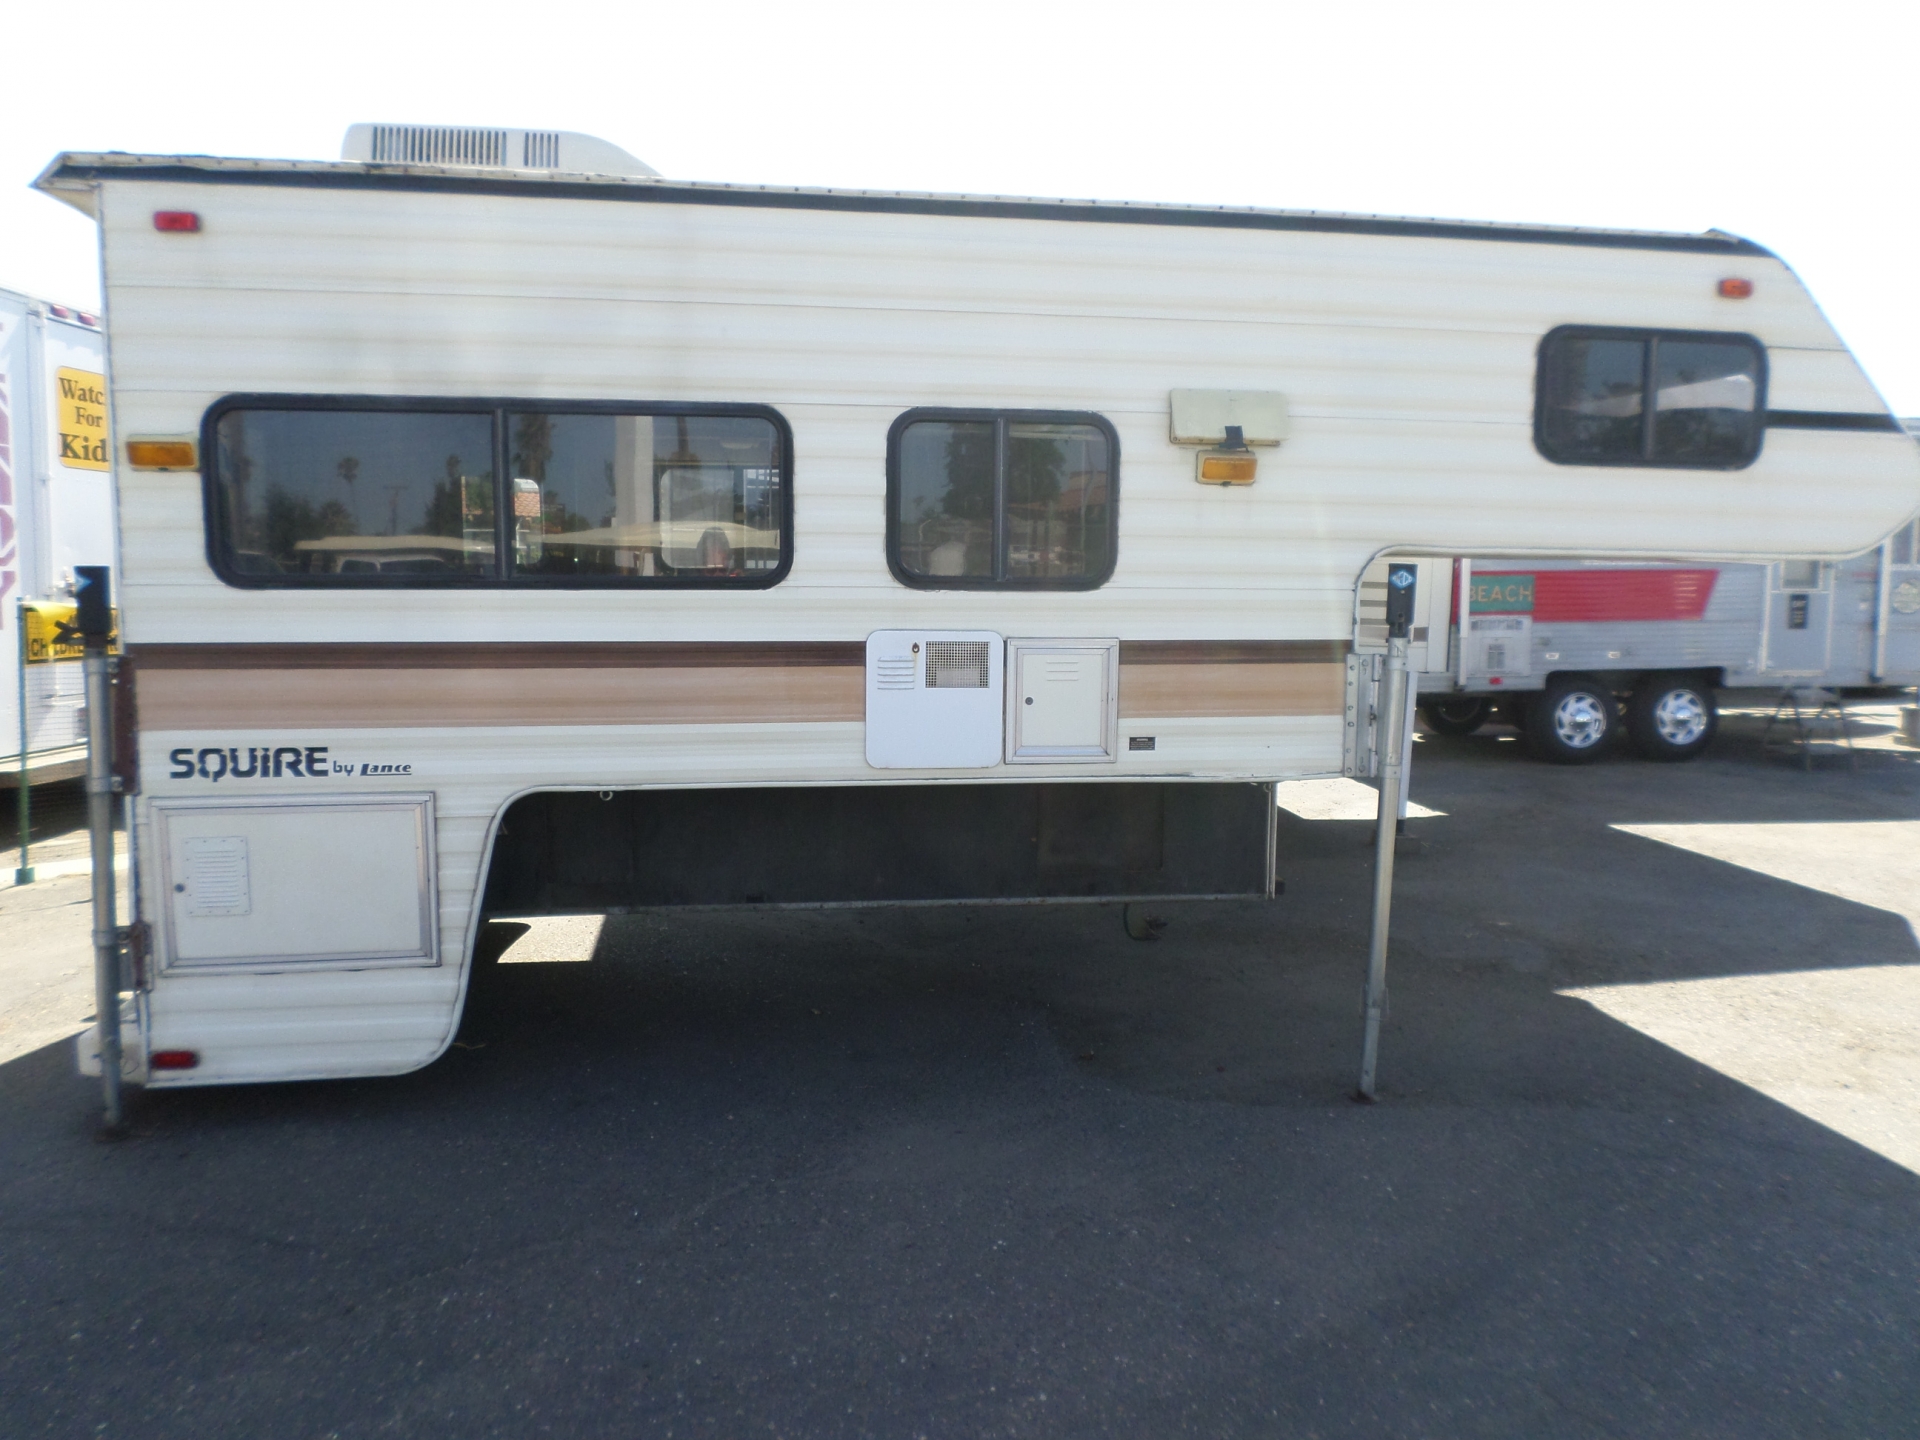 1991 Lance Squire Cabover Camper